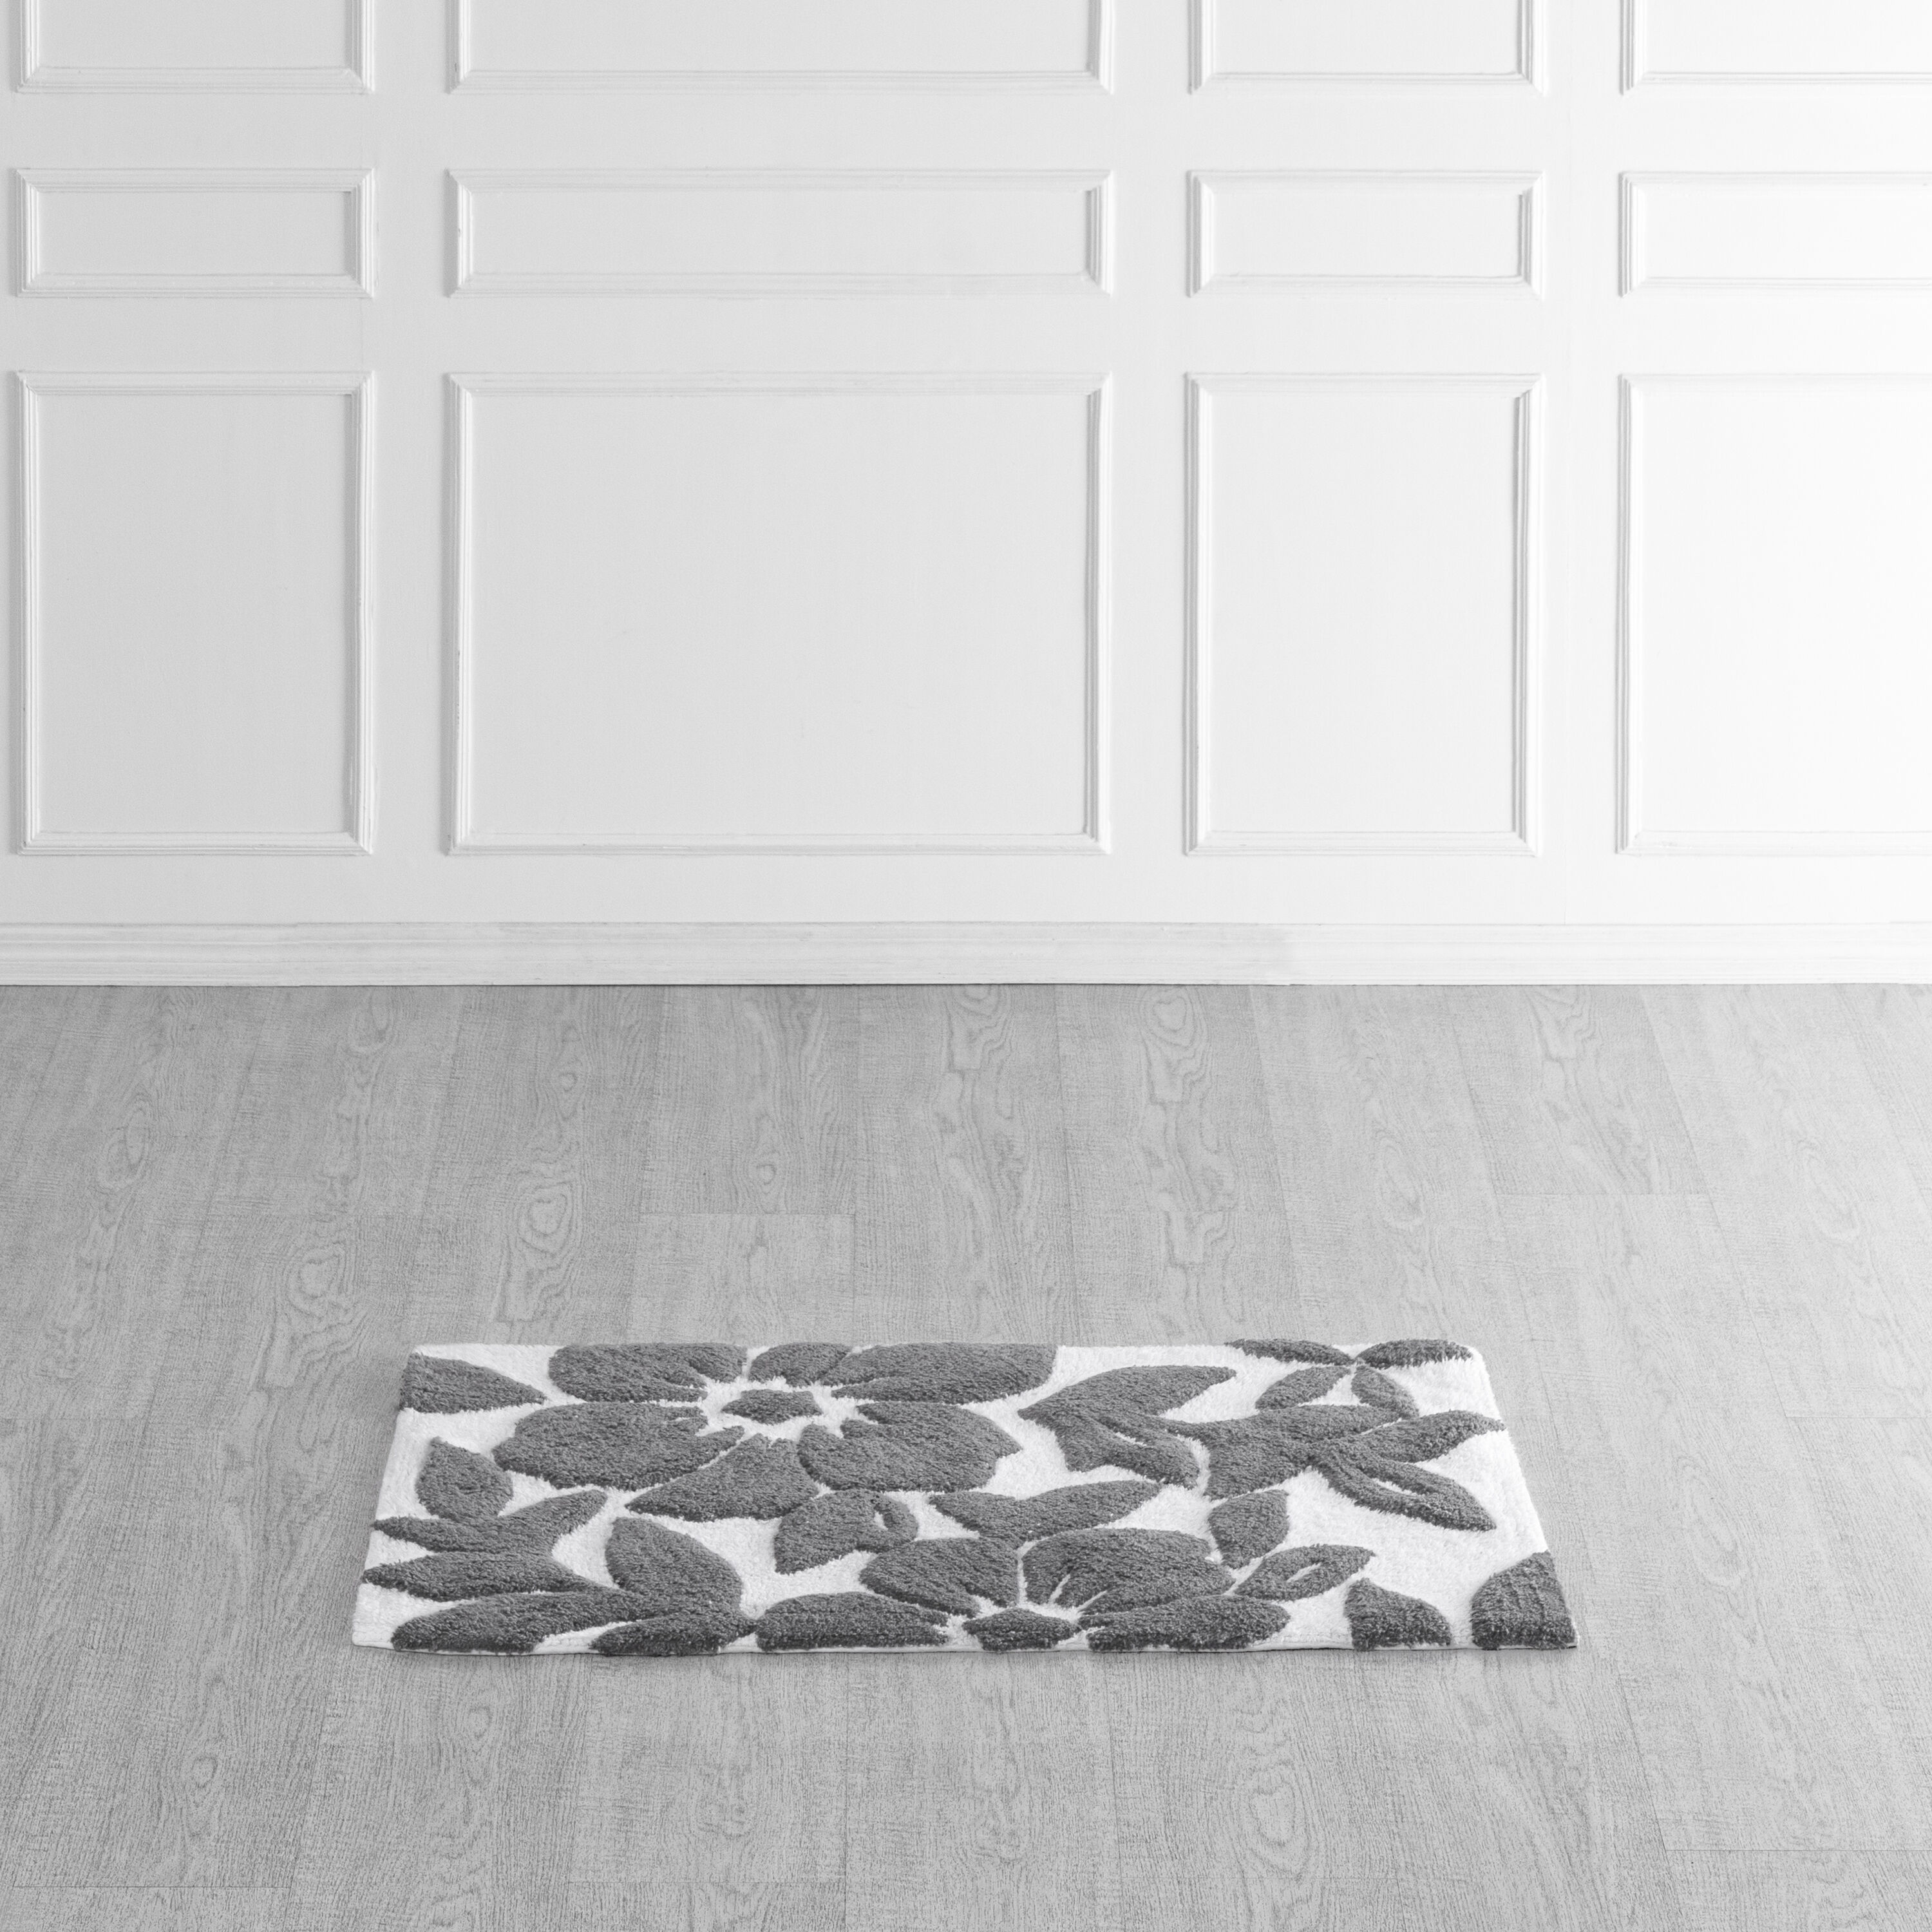 MH LONDON Bath Mats 21-in x 34-in Arctic and White Cotton Bath Mat